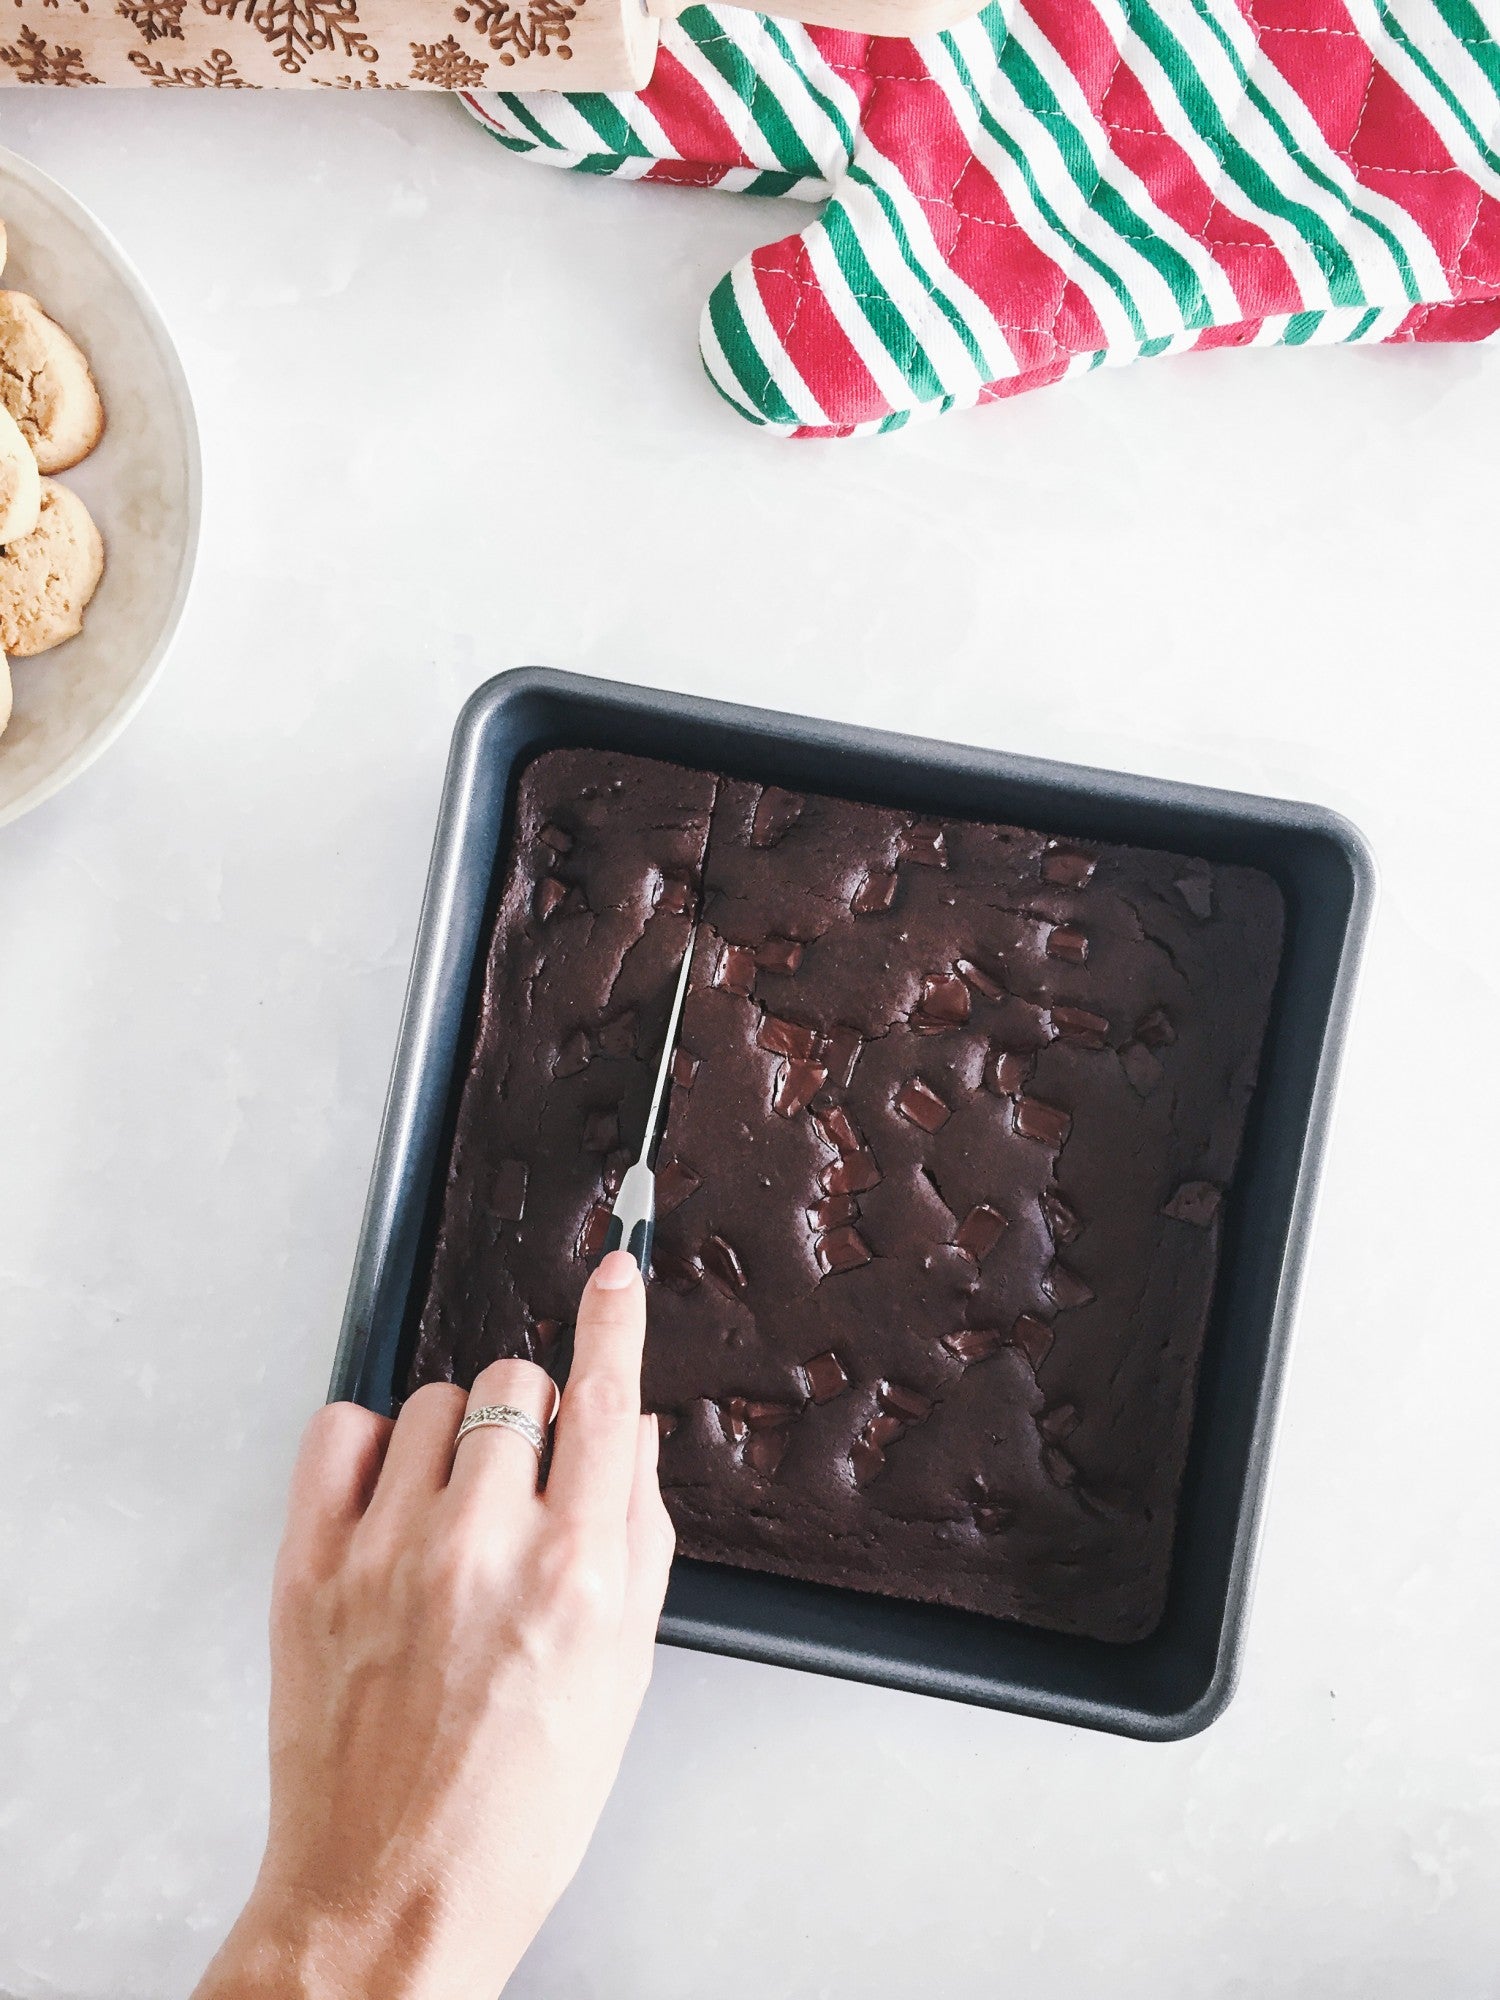 Tone It Up Mint Chocolate Brownie Recipe Healthy Holiday Treat